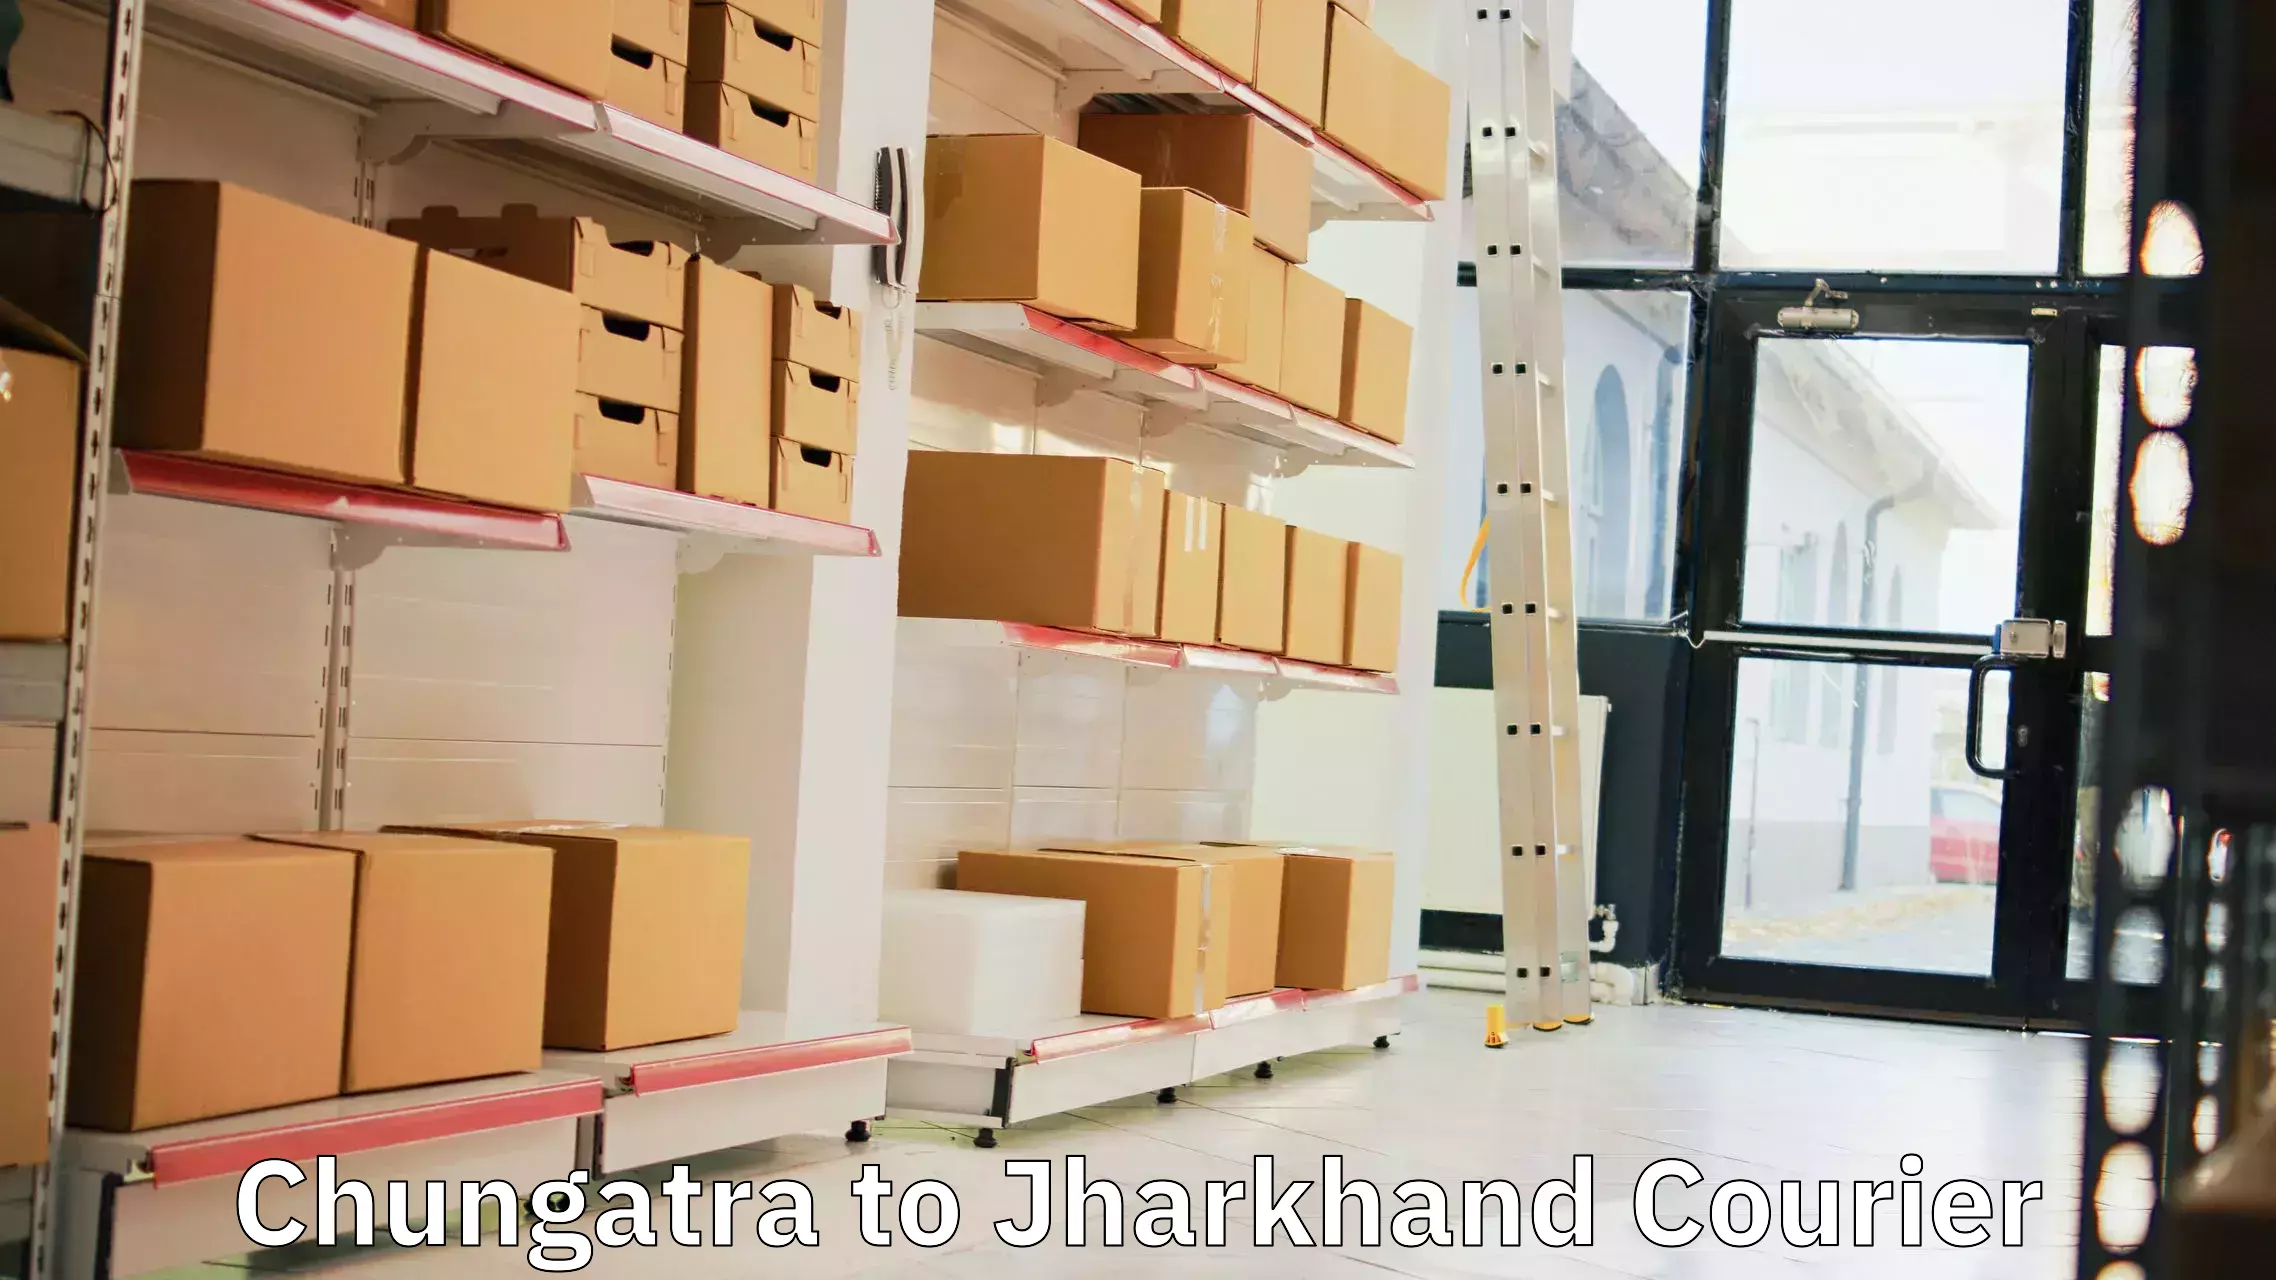 Next-generation courier services Chungatra to Topchanchi